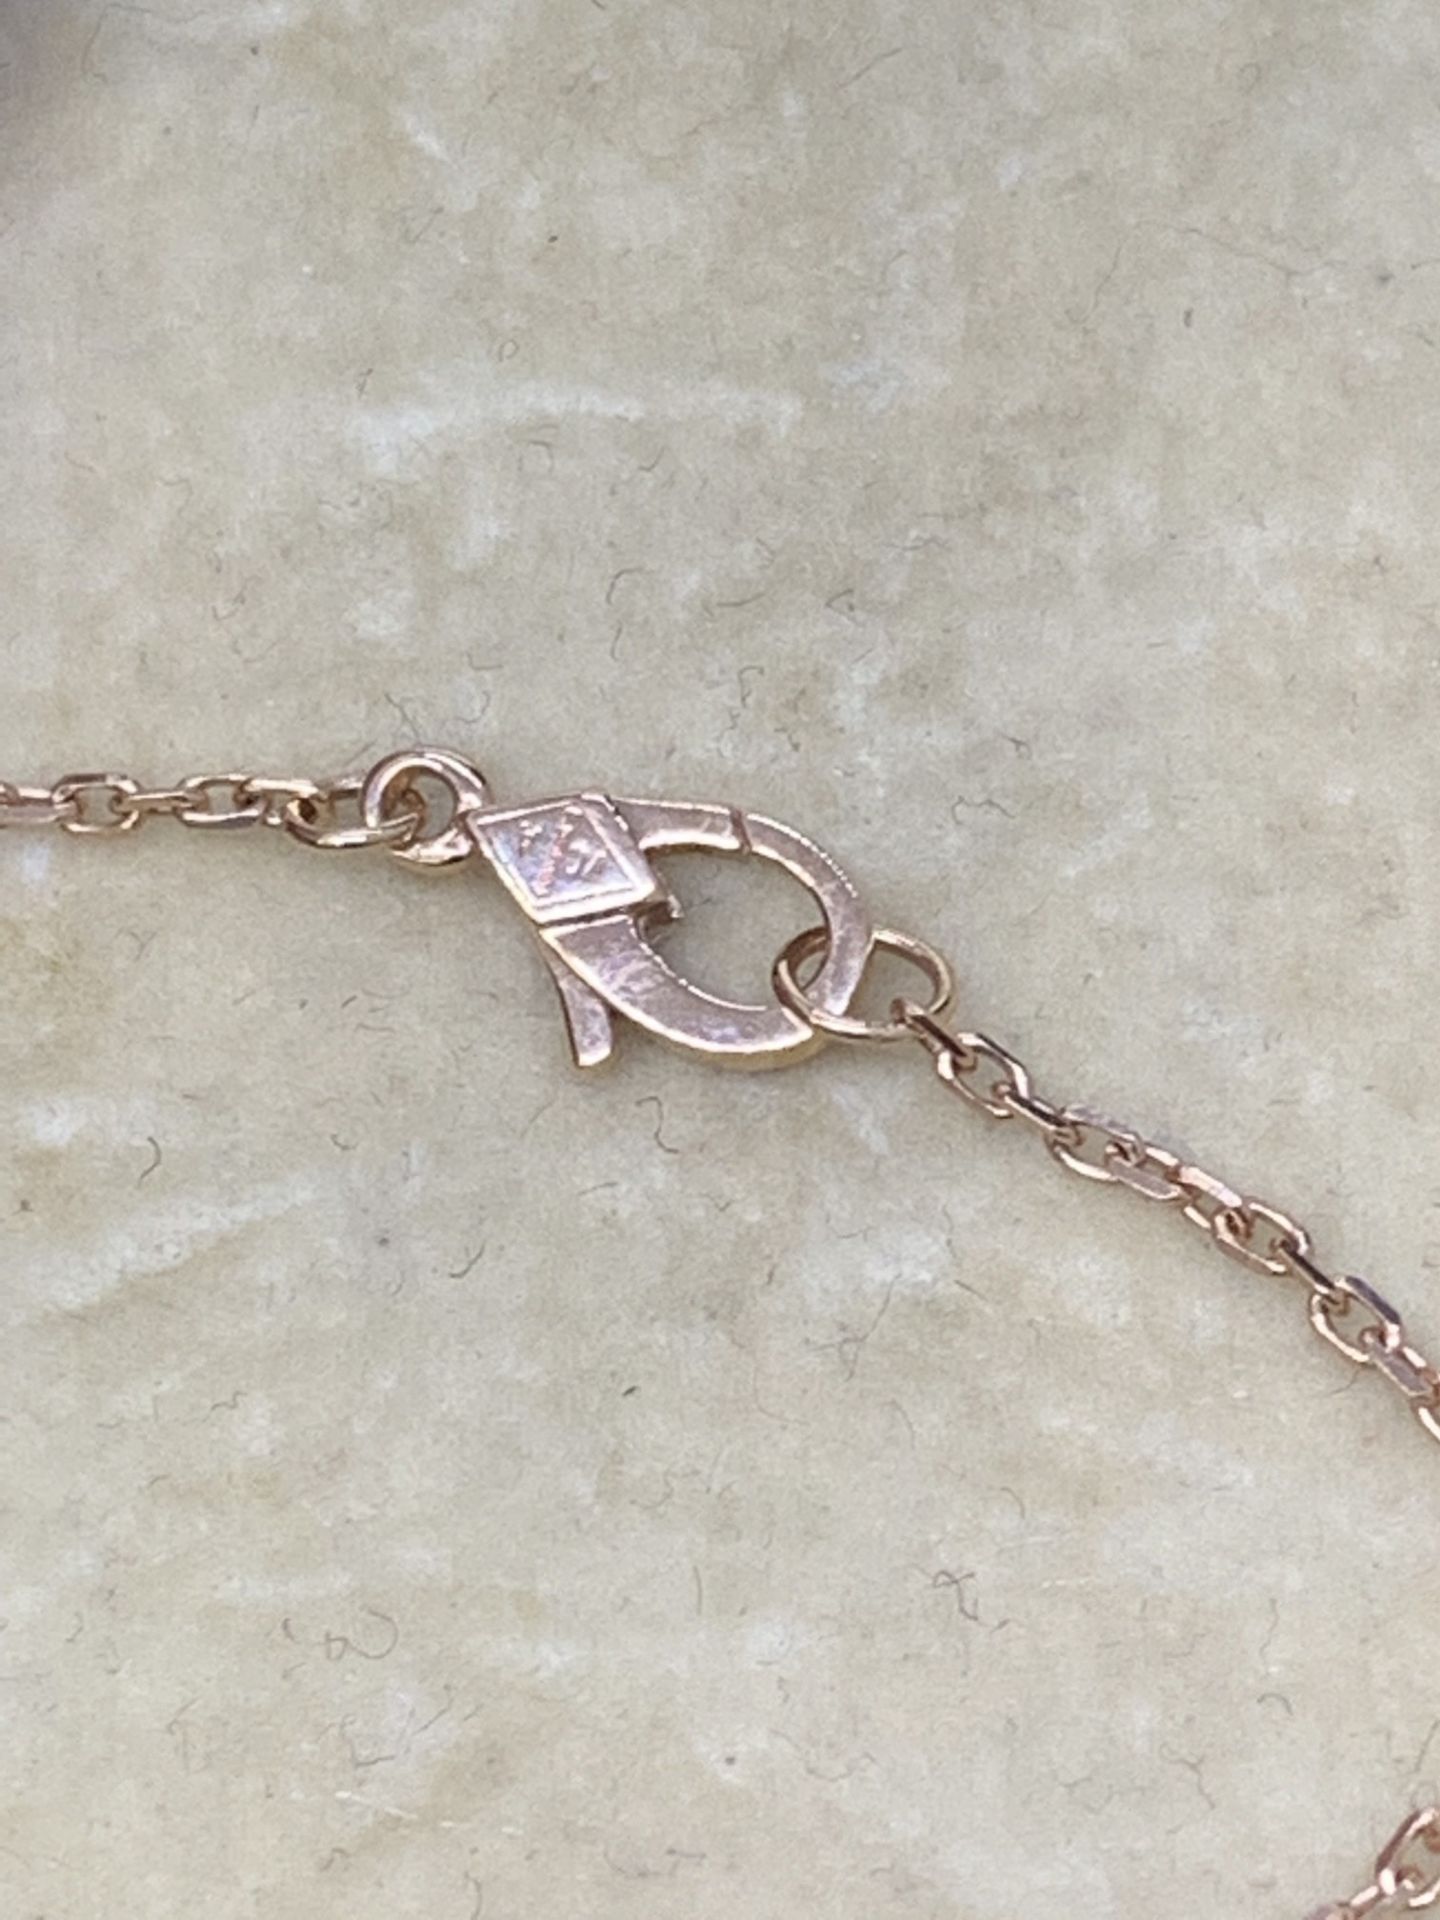 18 carat rose gold Diamond set pendant and chain marked VCA 750 - Image 7 of 7